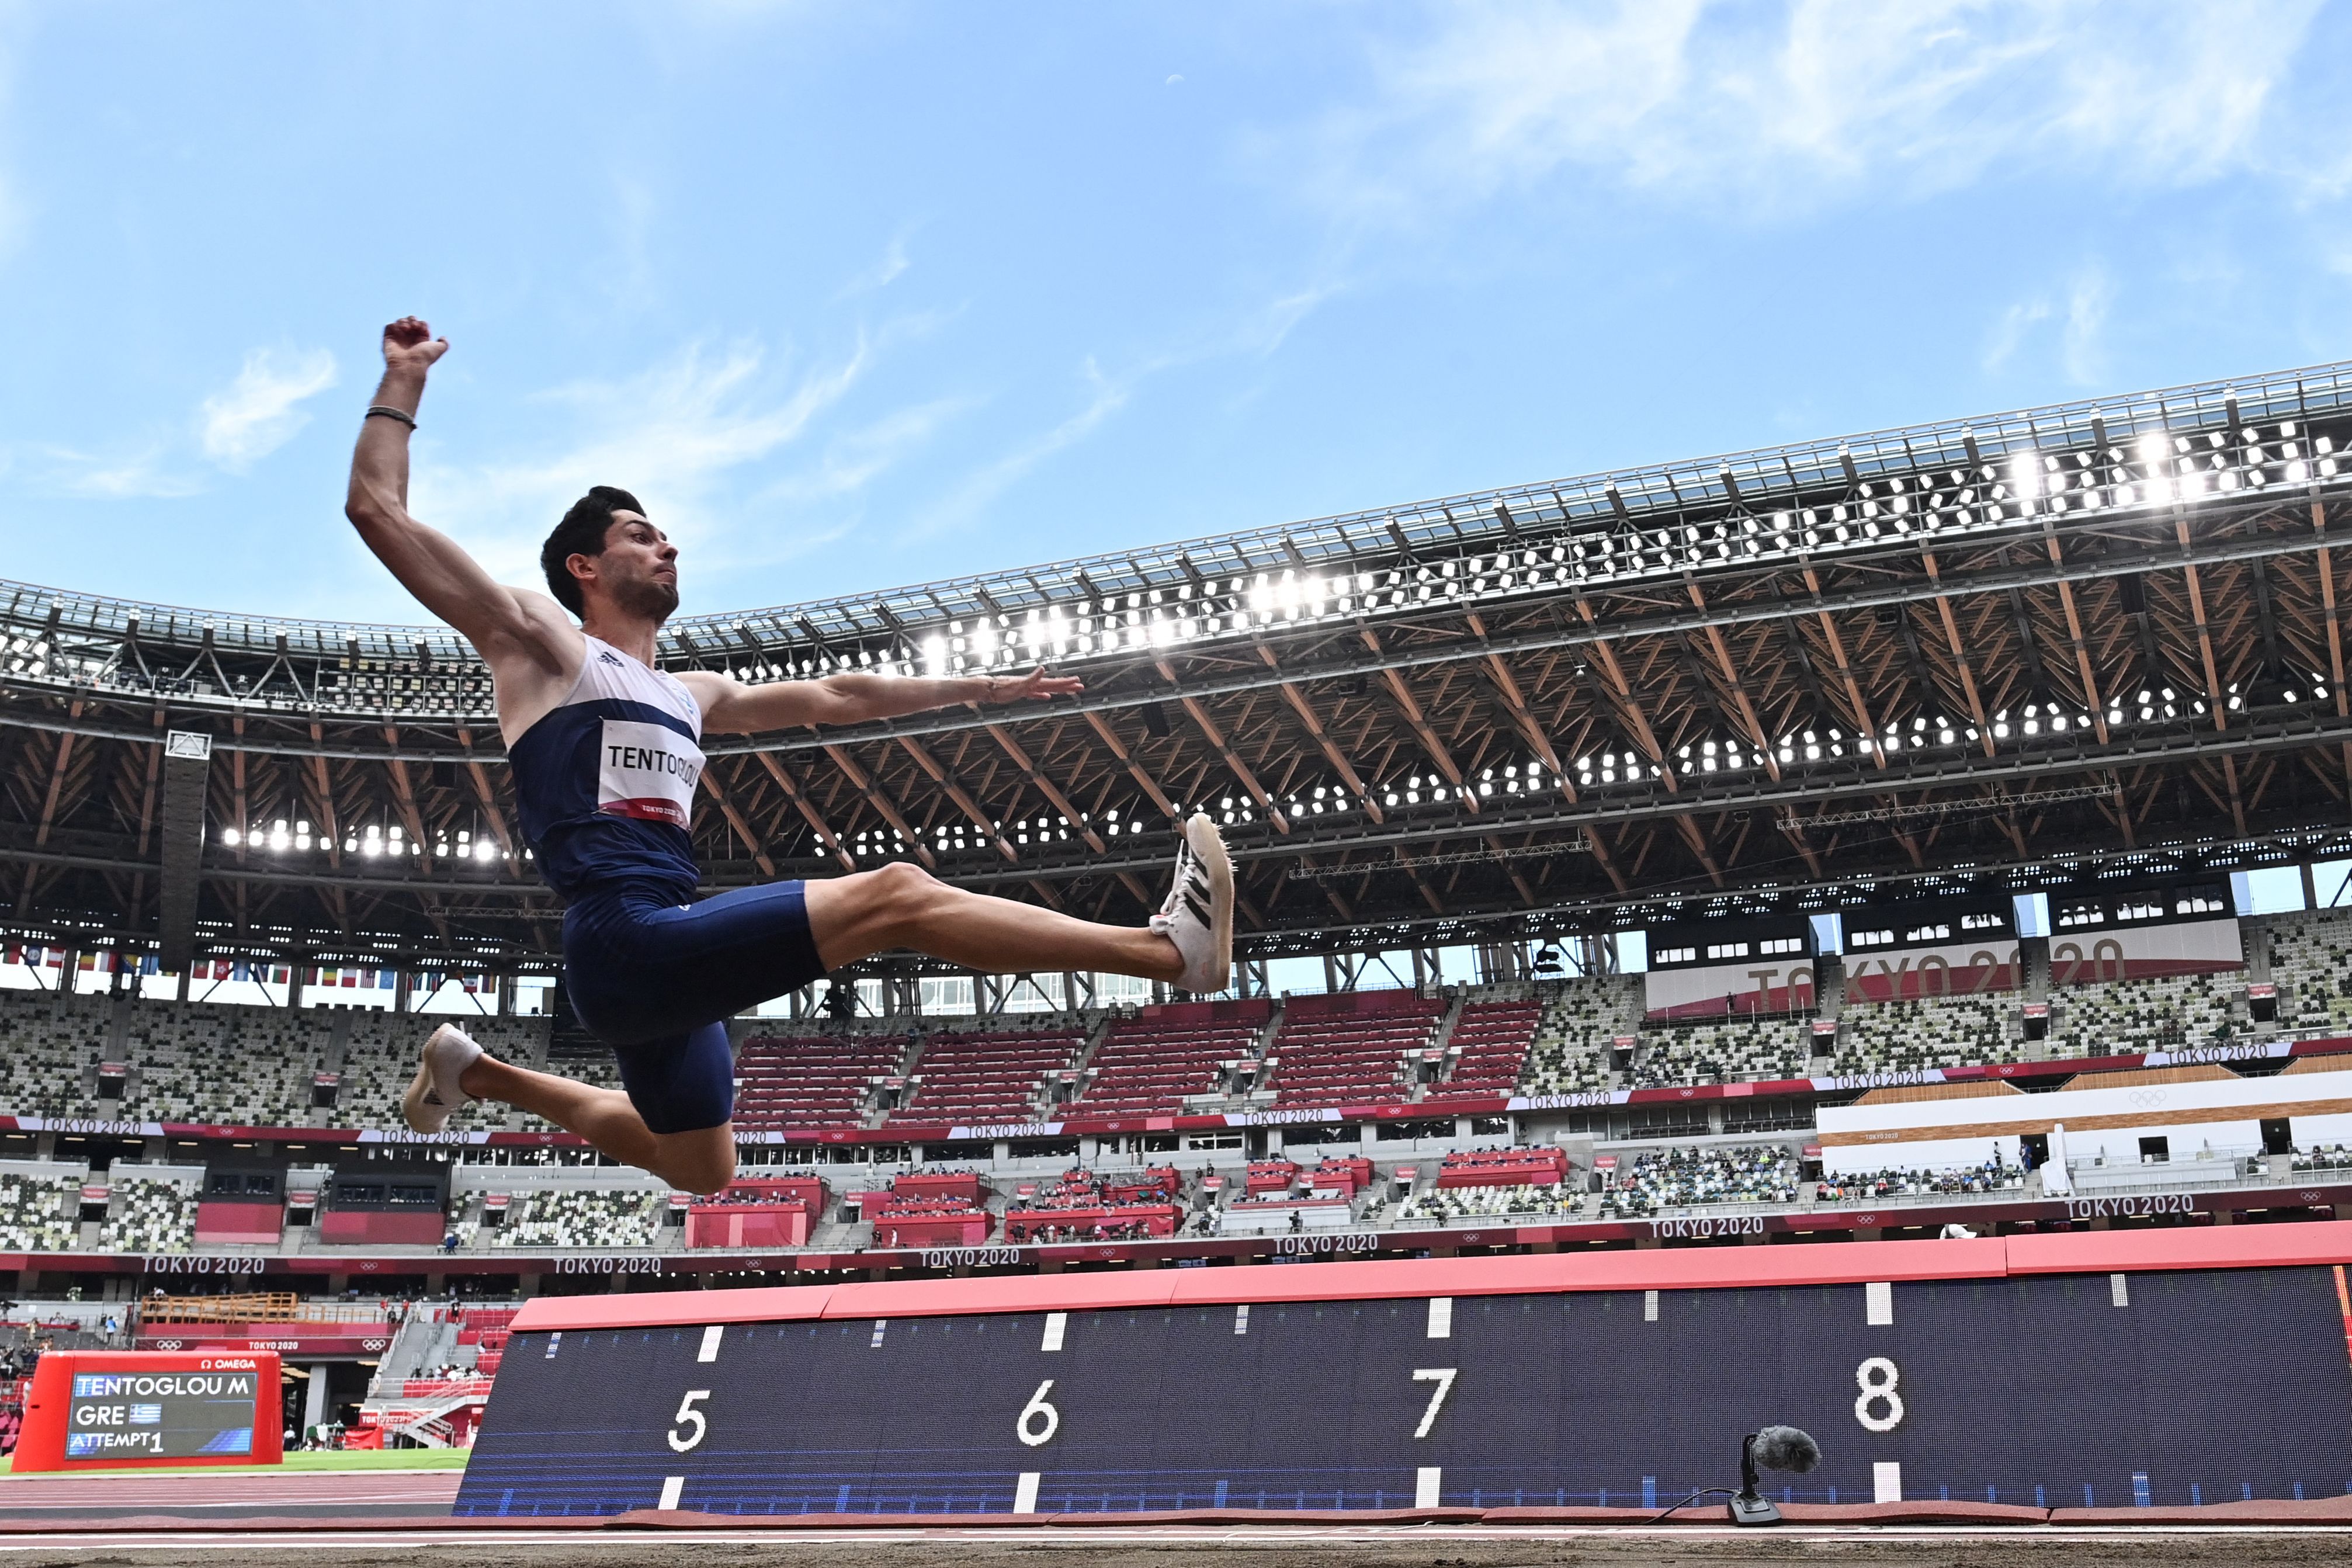  Greece's Miltiadis Tentoglou competes in the men's long jump final during the Tokyo 2020 Olympic Games at the Olympic Stadium in Tokyo on August 2